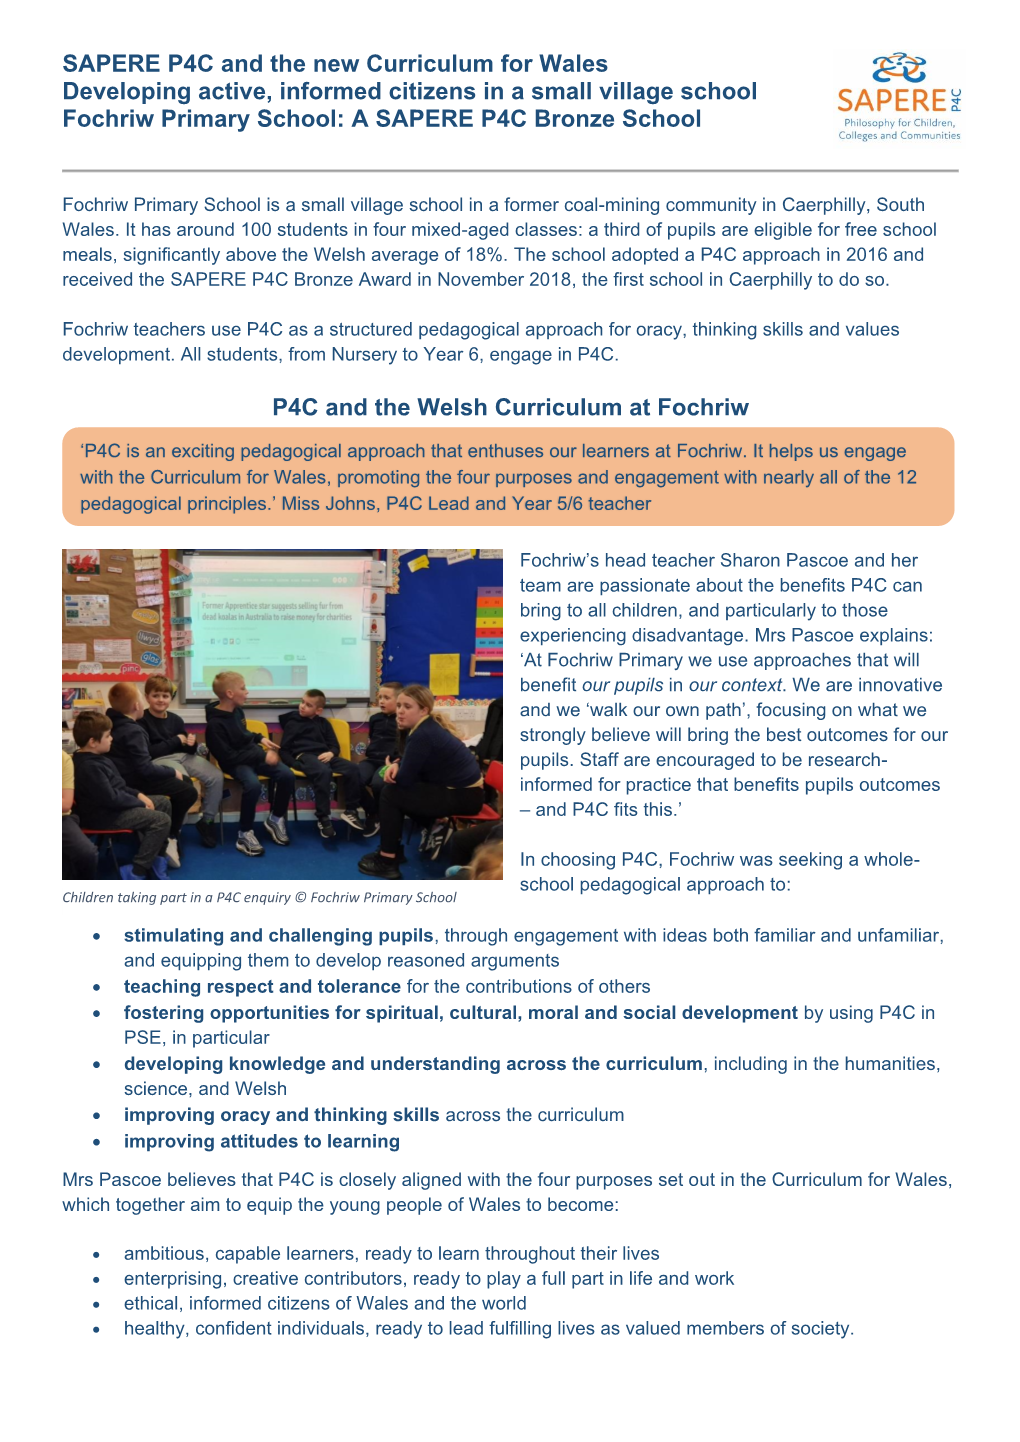 Download a Printable PDF of Our Fochriw Primary